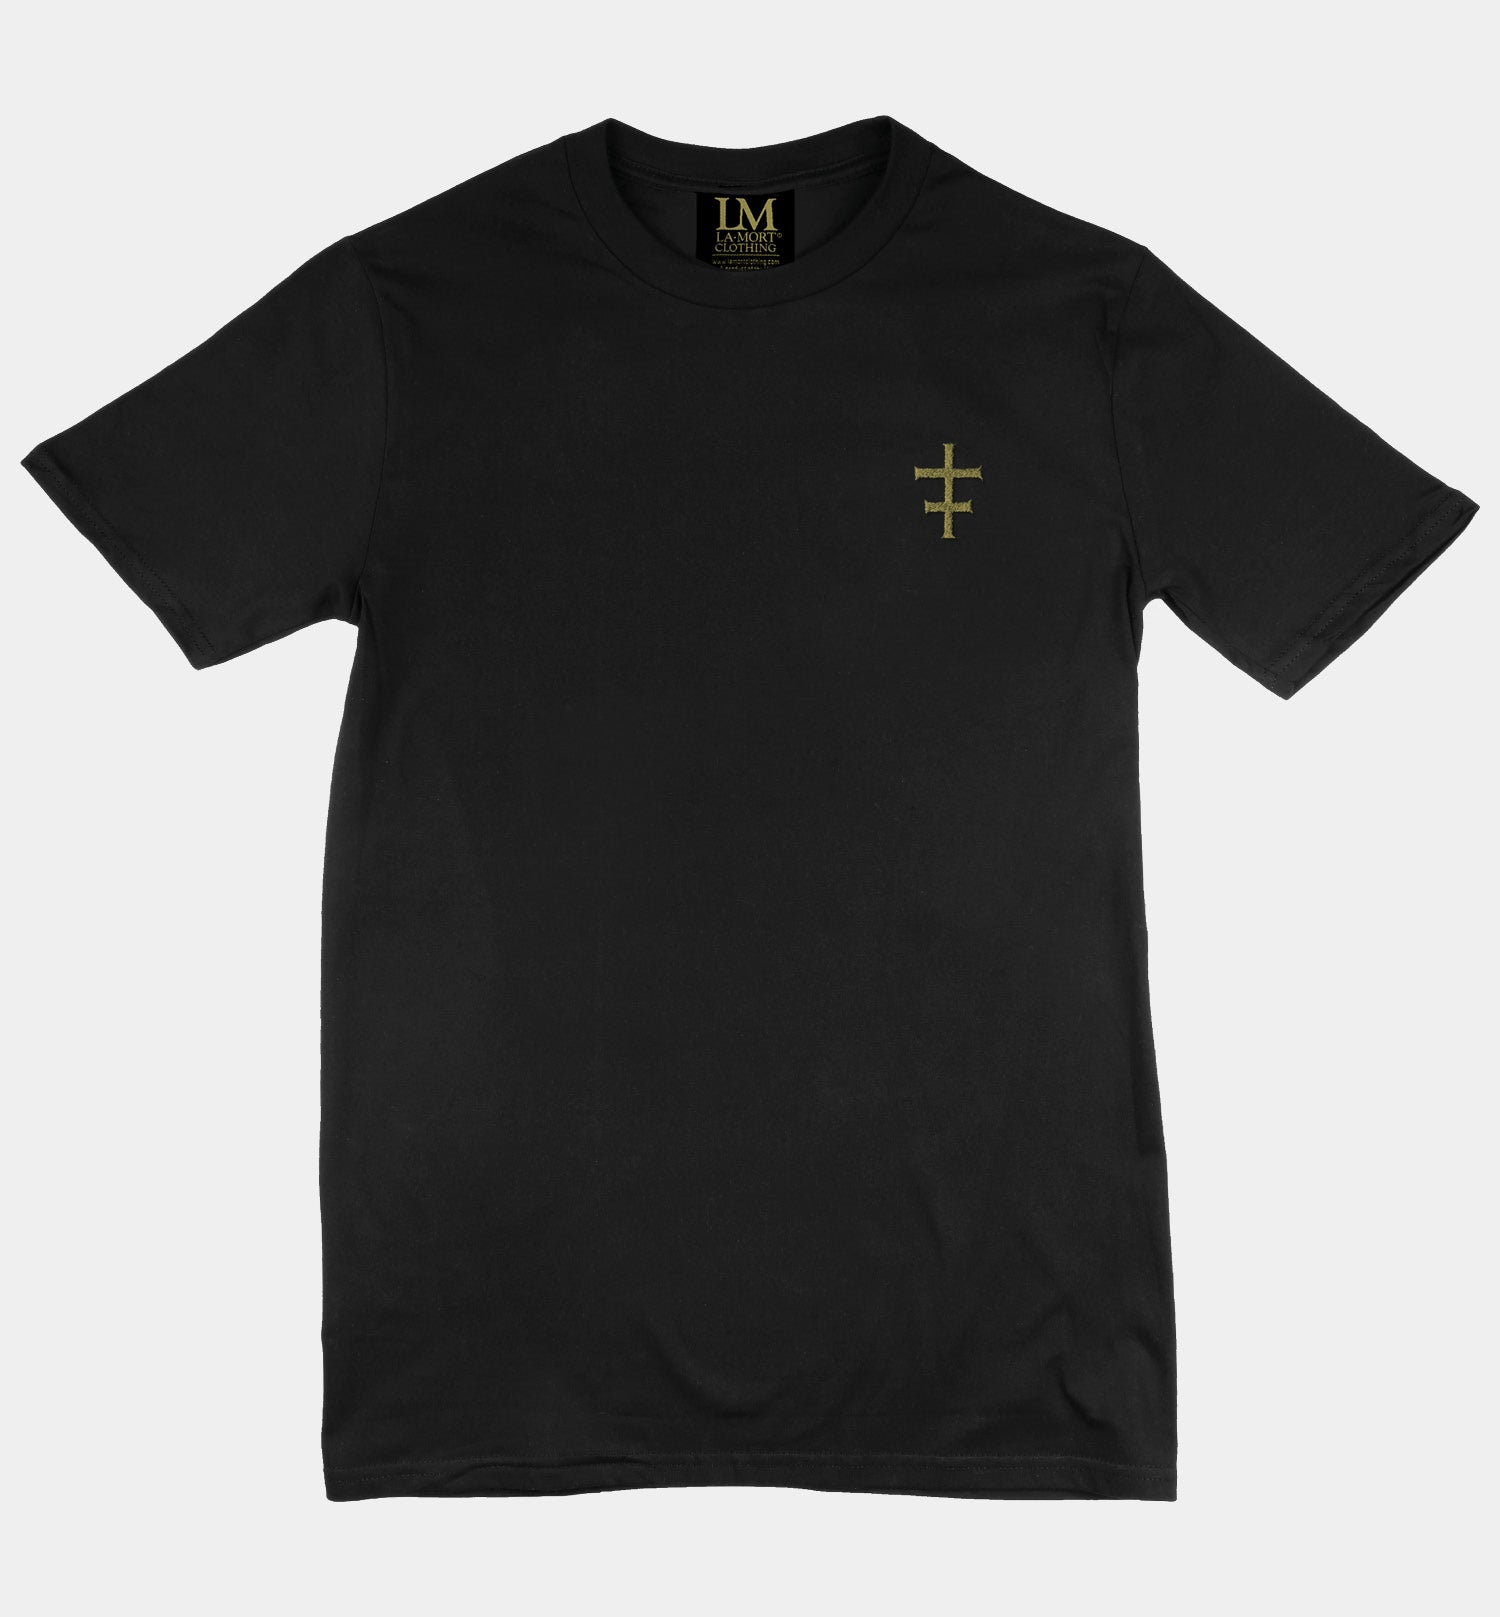 Morality Occult Tattoo Men’s Double-sided T-shirt by La Mort Clothing